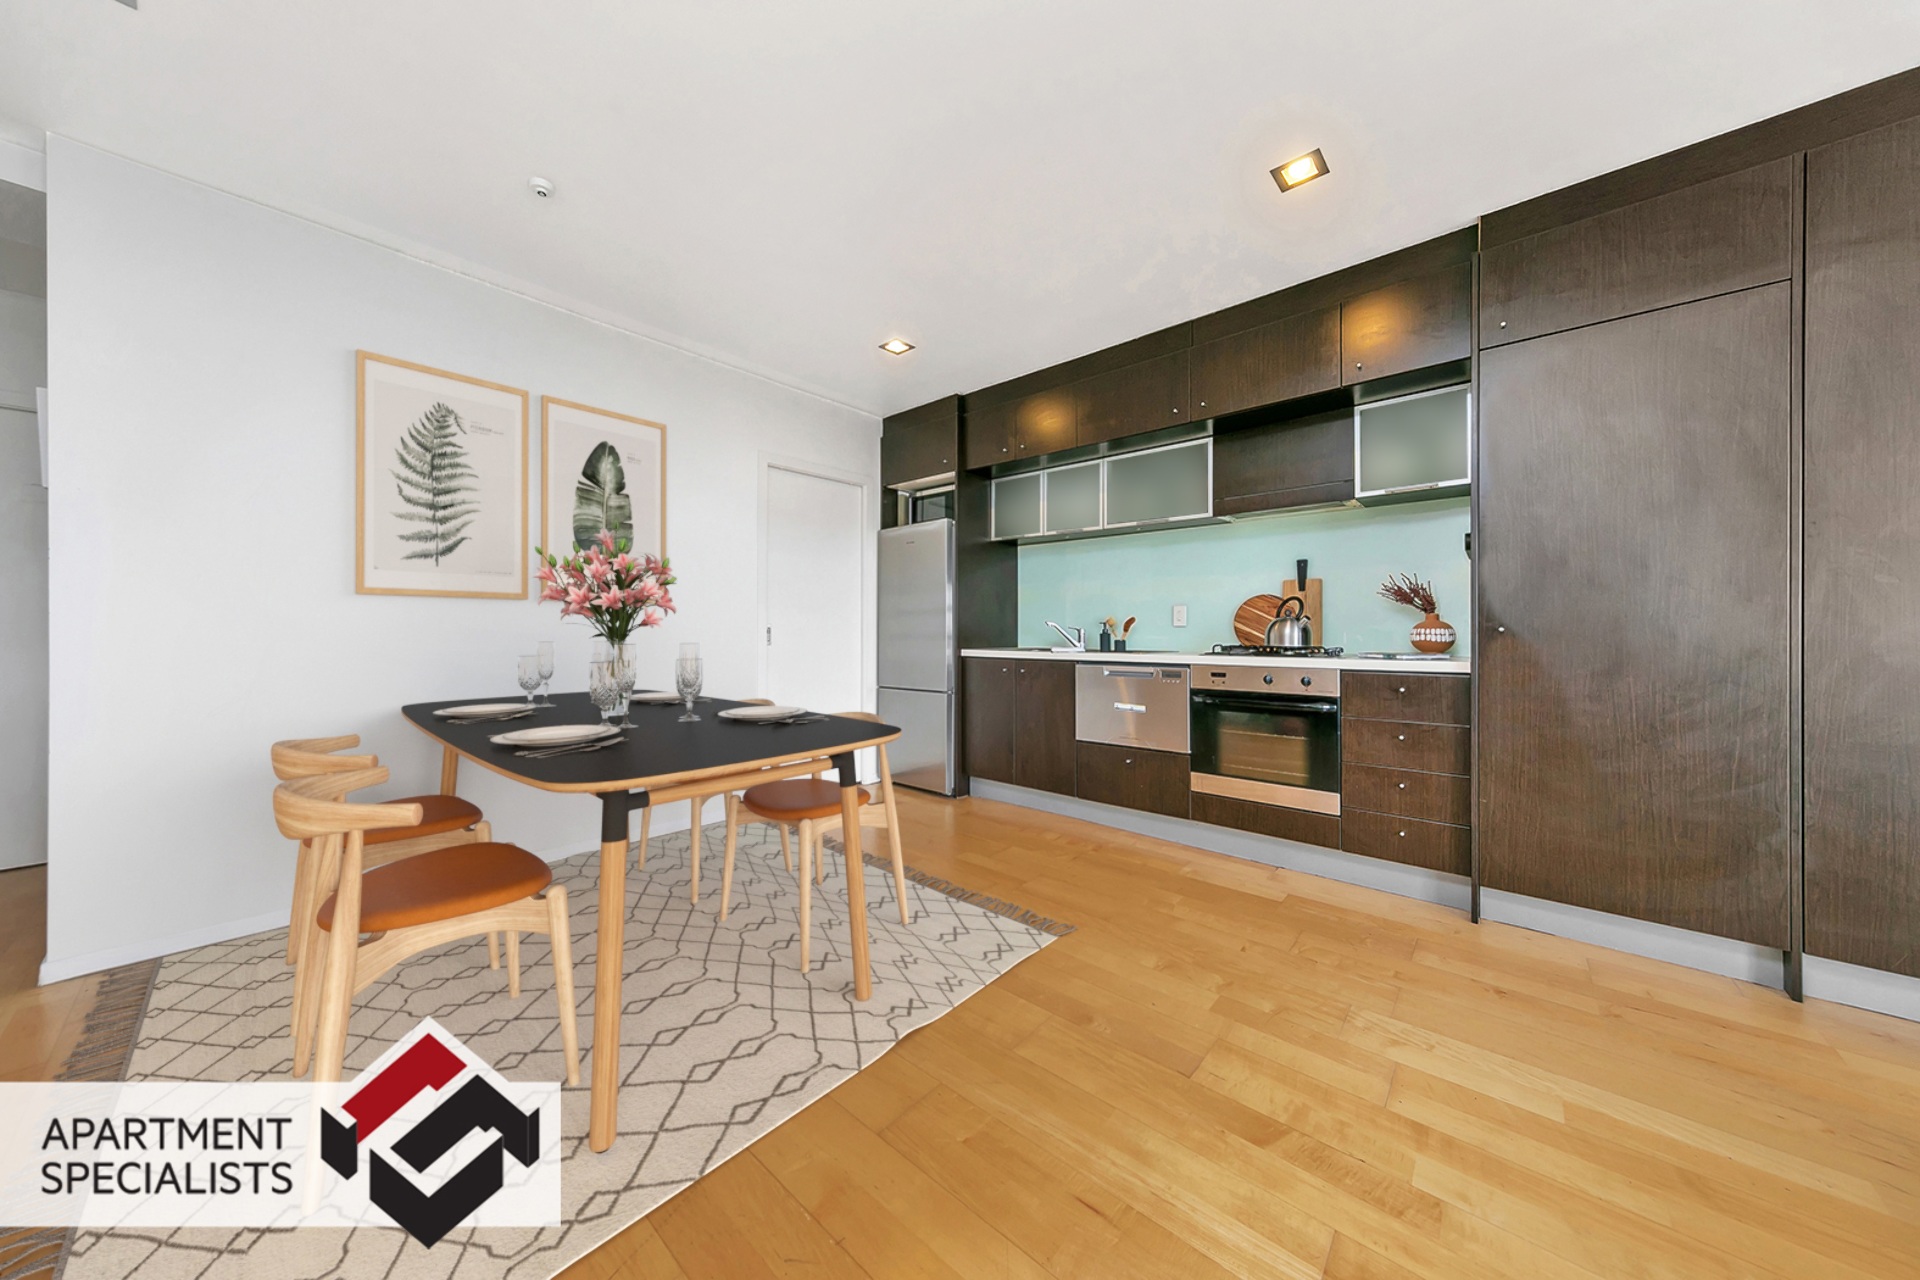 1 | 221 Great North Road, Grey Lynn | Apartment Specialists